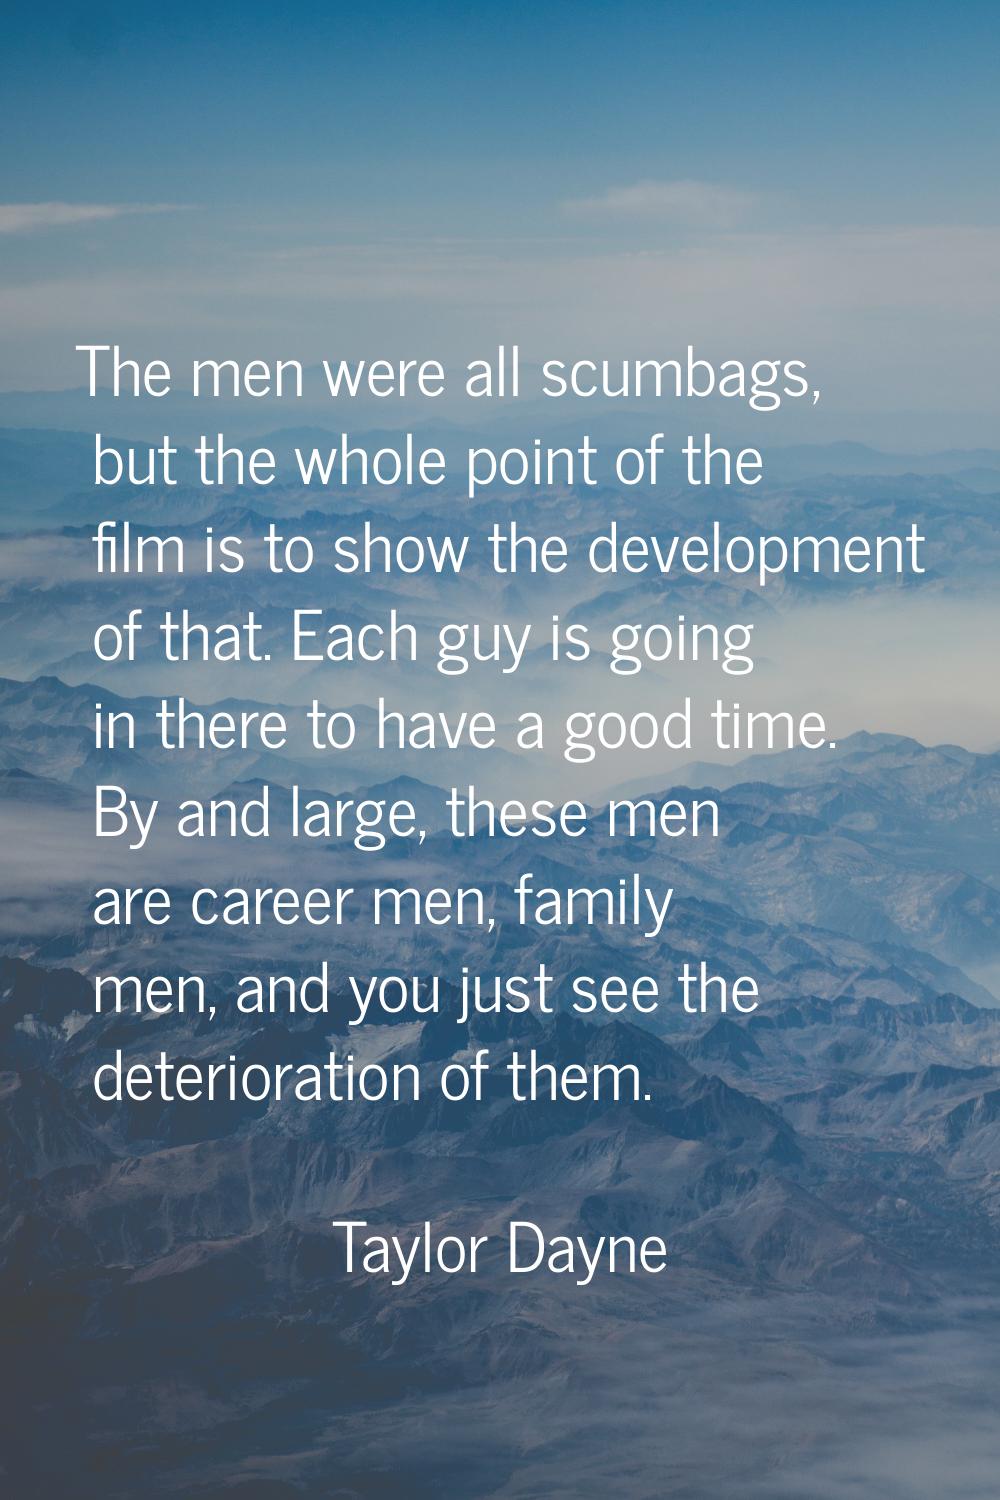 The men were all scumbags, but the whole point of the film is to show the development of that. Each